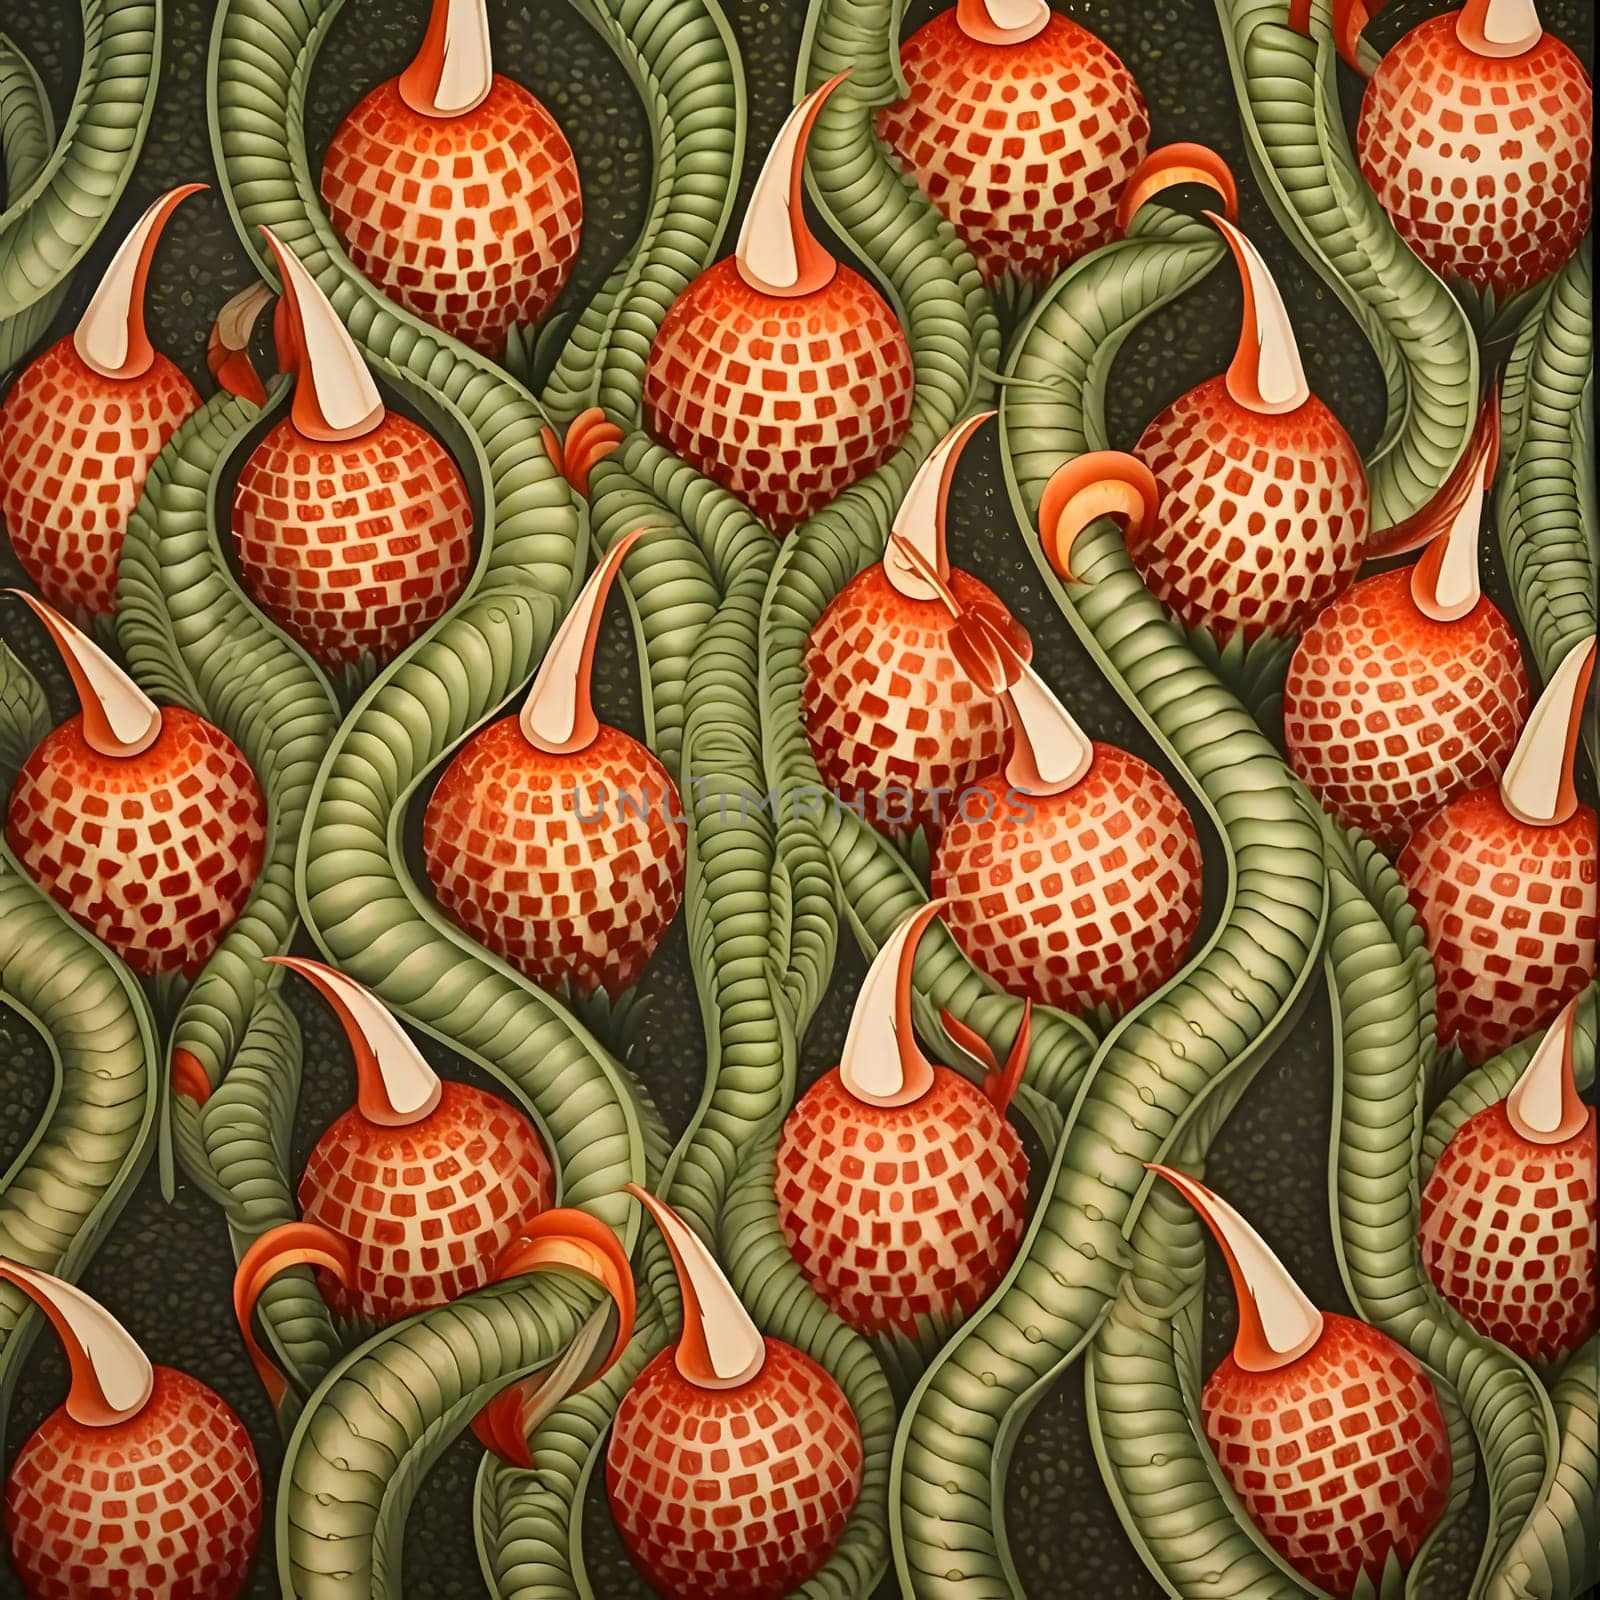 Patterns and banners backgrounds: Seamless pattern of red ripe strawberries on a dark background.